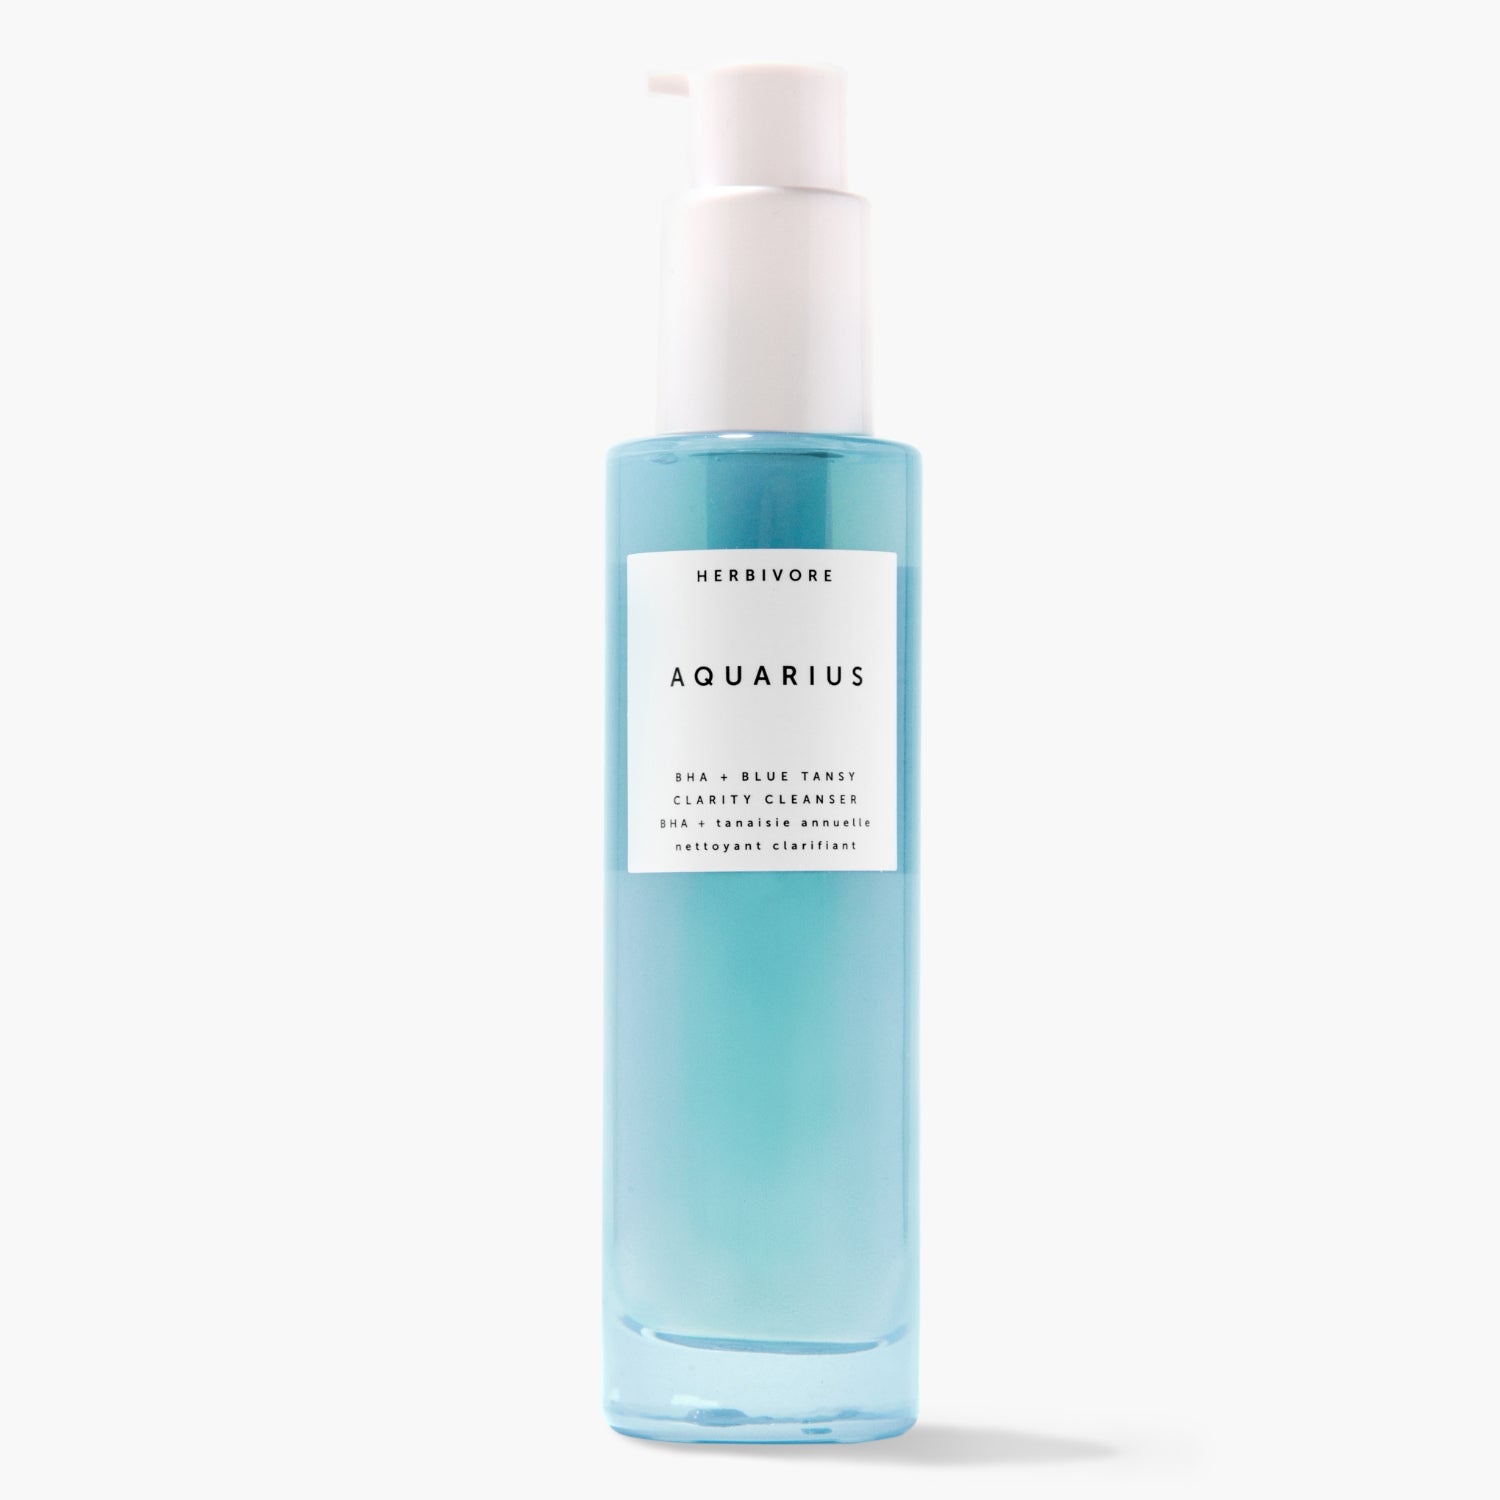 Blue bottle of Aquarius BHA + Blue Tansy Clarity Cleanser